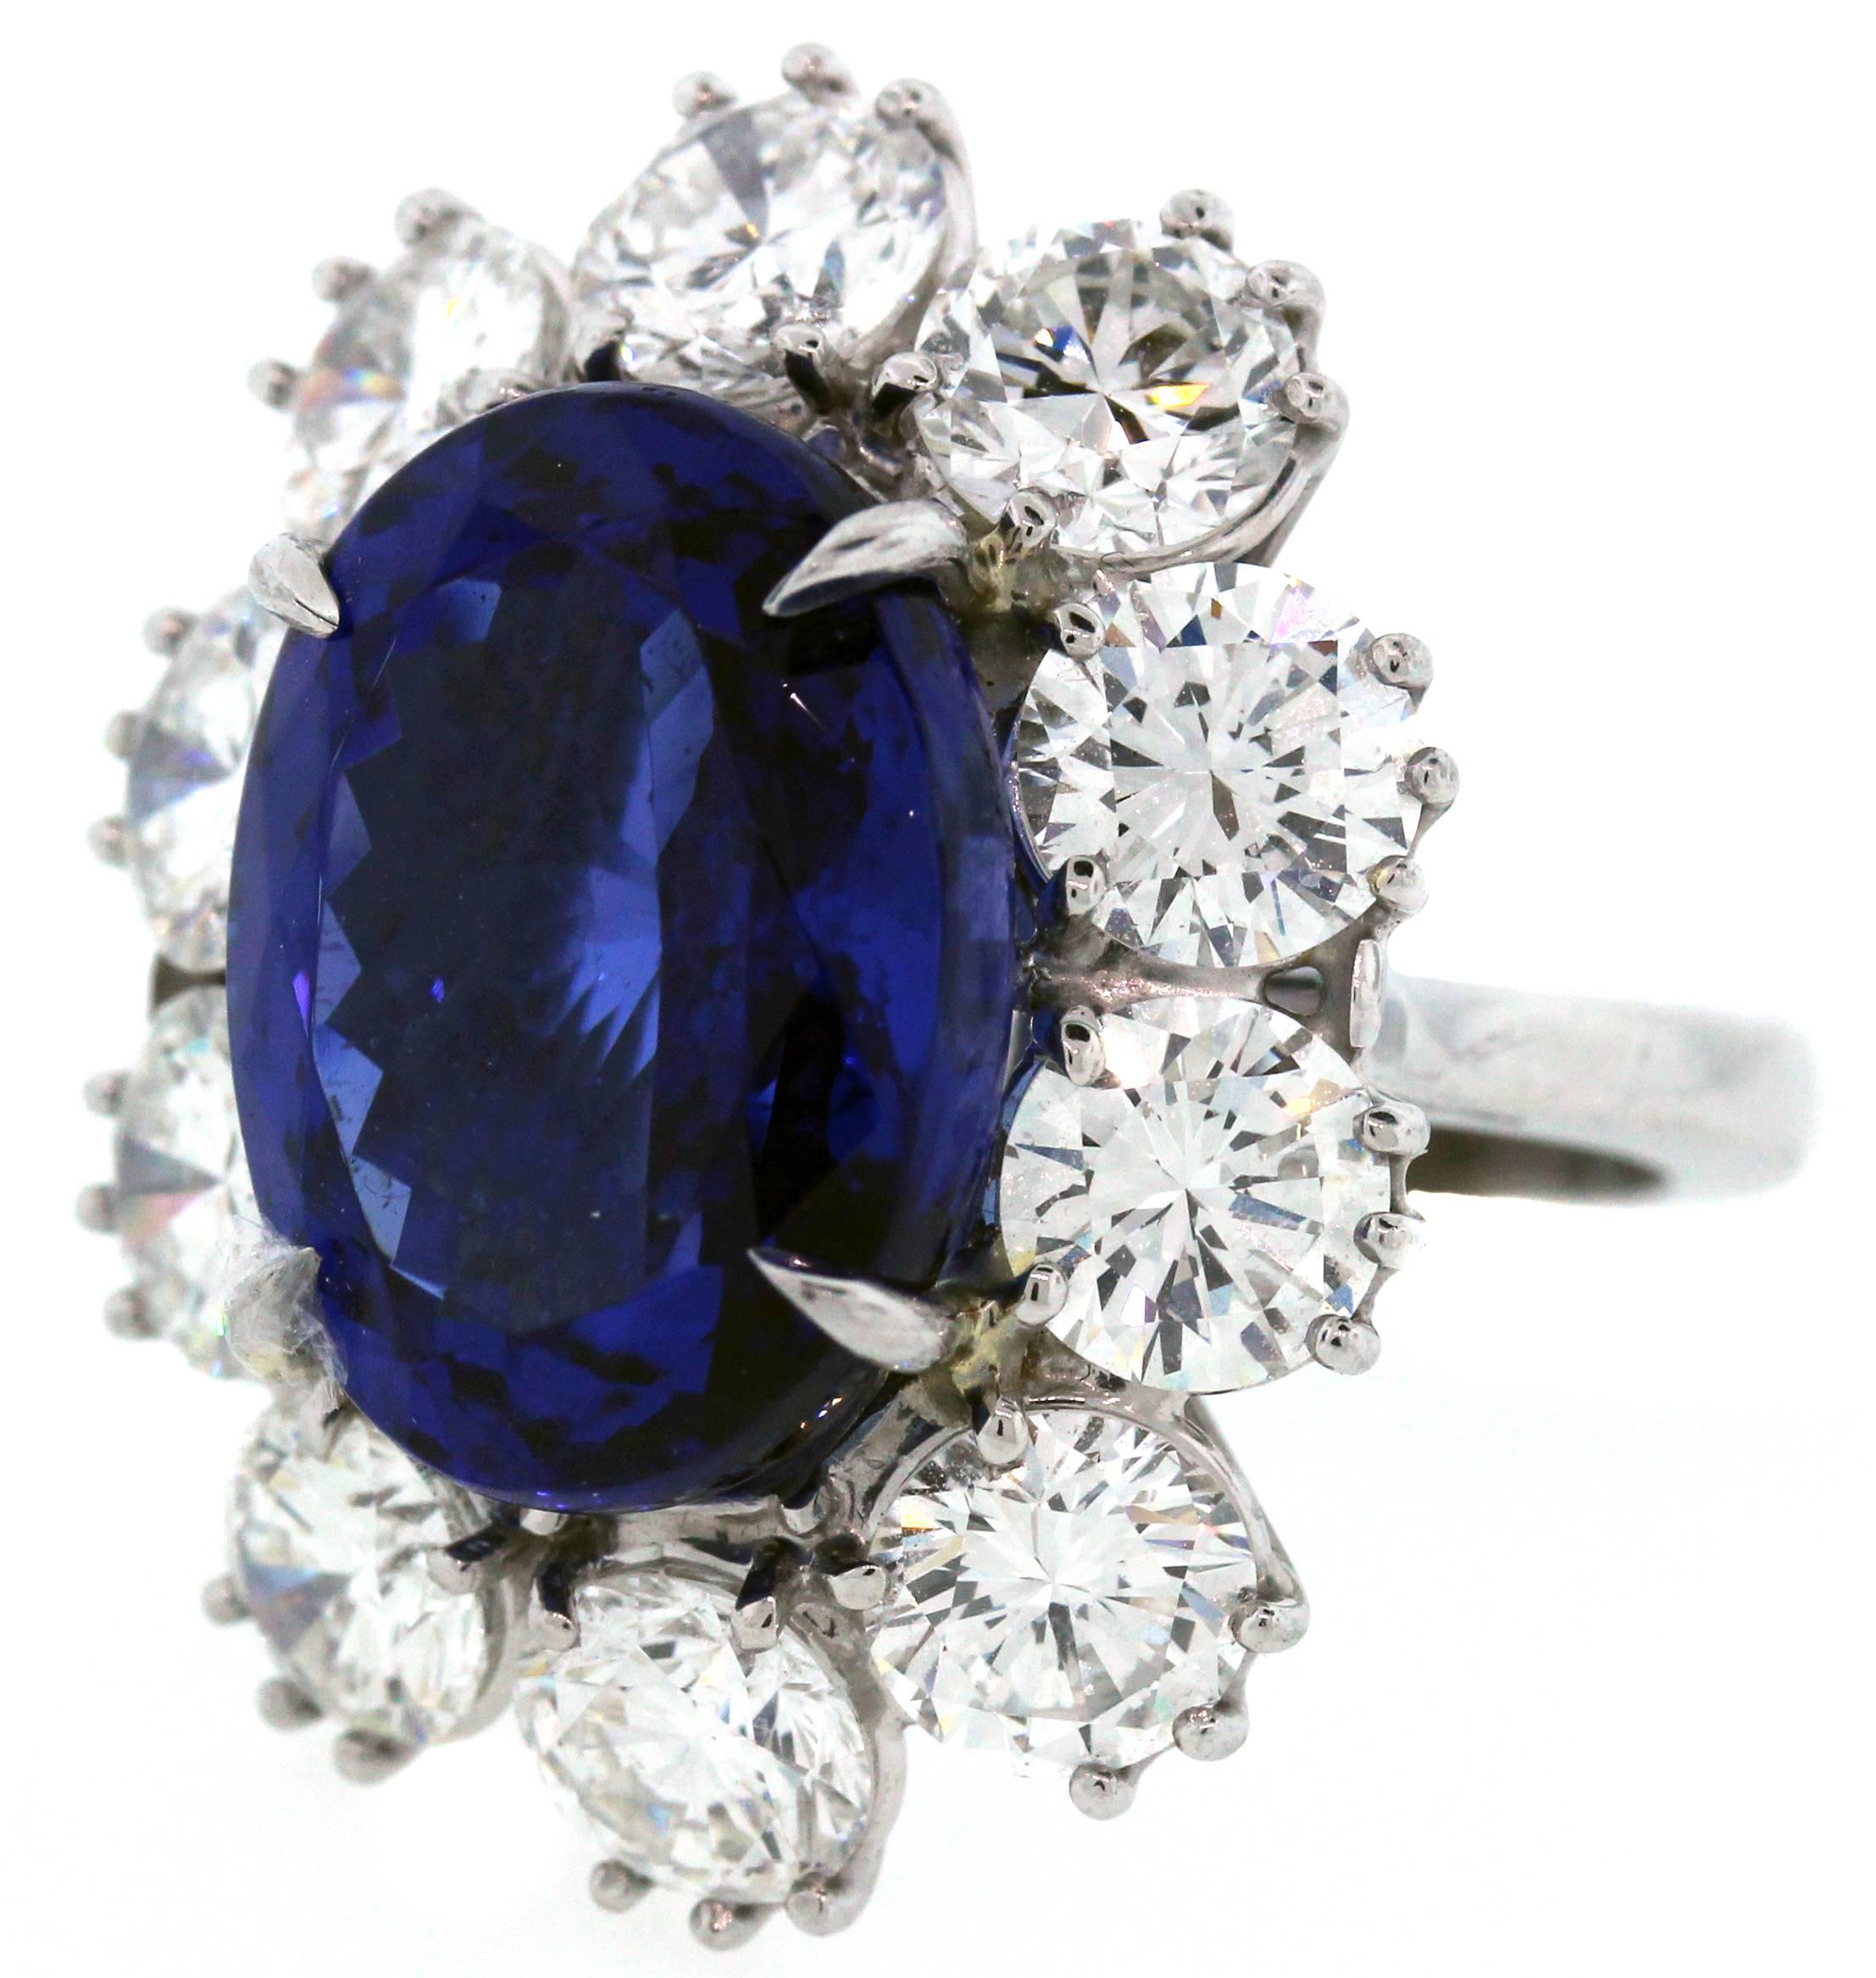 Platinum Ring with Tanzanite Center Surrounded by Diamonds

Tanzanite is oval-cut with incredible color and quality. It is apprx. 12 carats total weight.

Dimensions: 15mm x 11mm

10 Diamonds surround the center stone. Diamonds are each apprx. 0.82